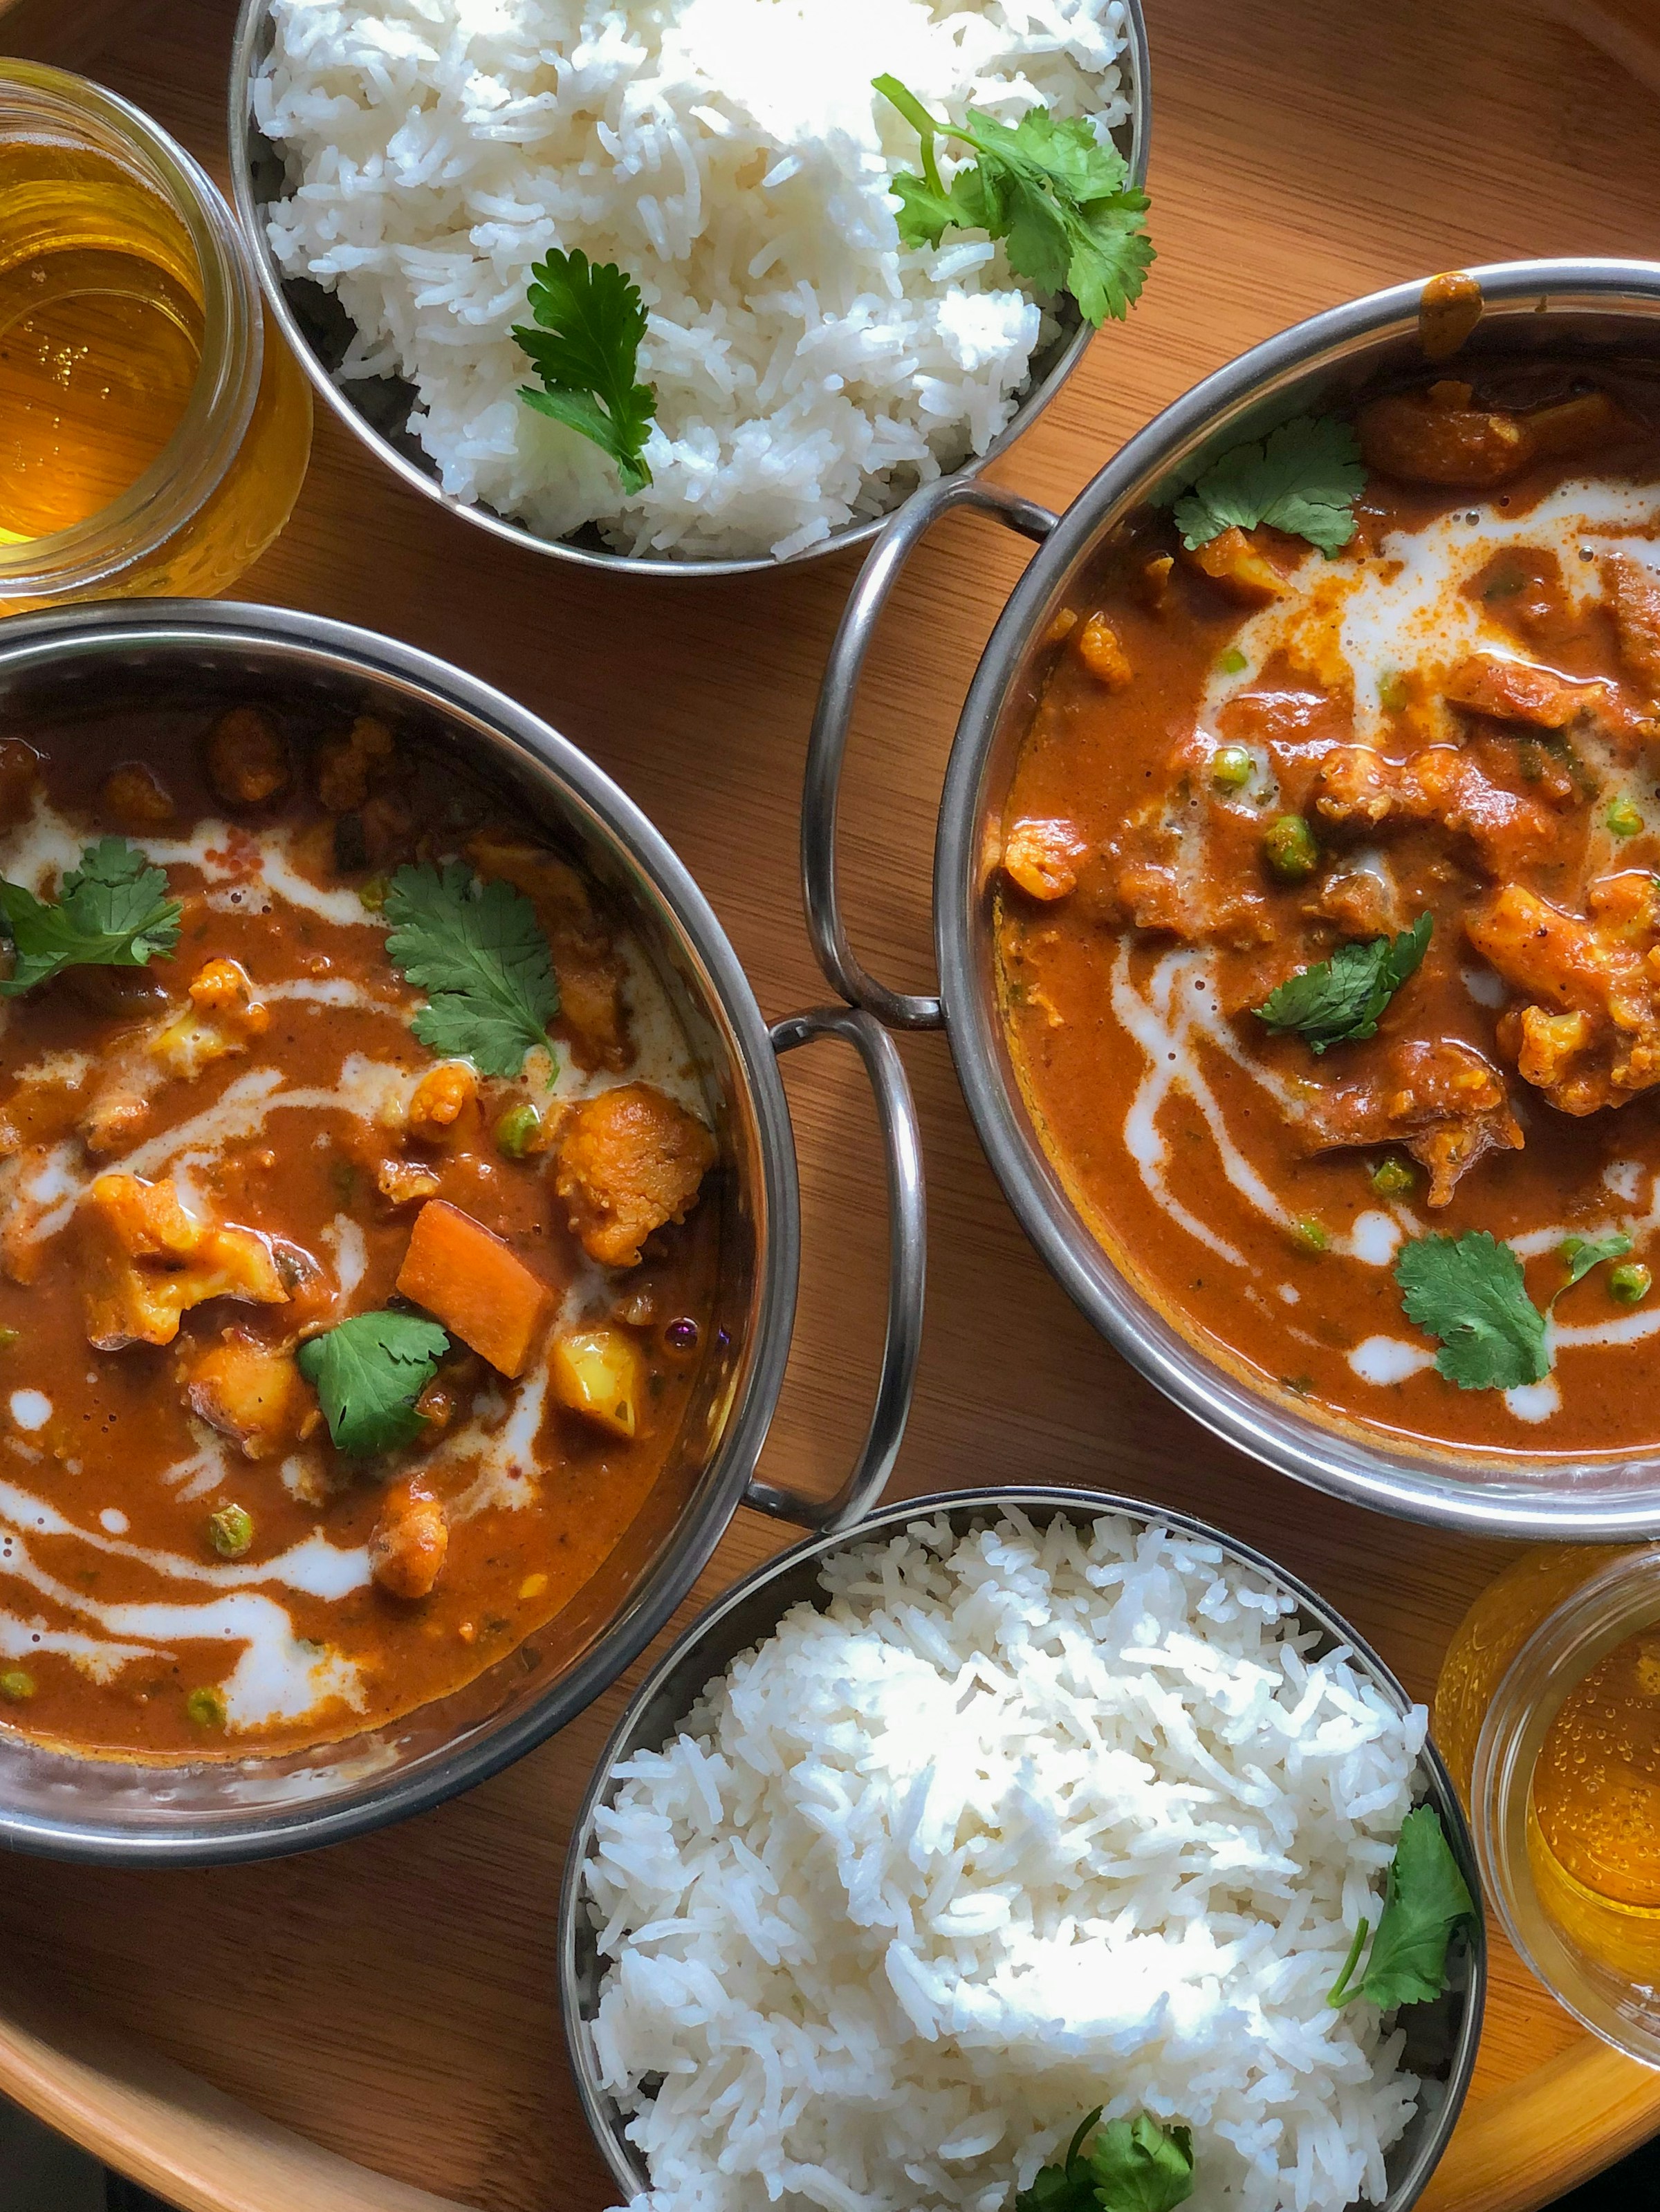 Bowls of curry and rice | Source: Unsplash